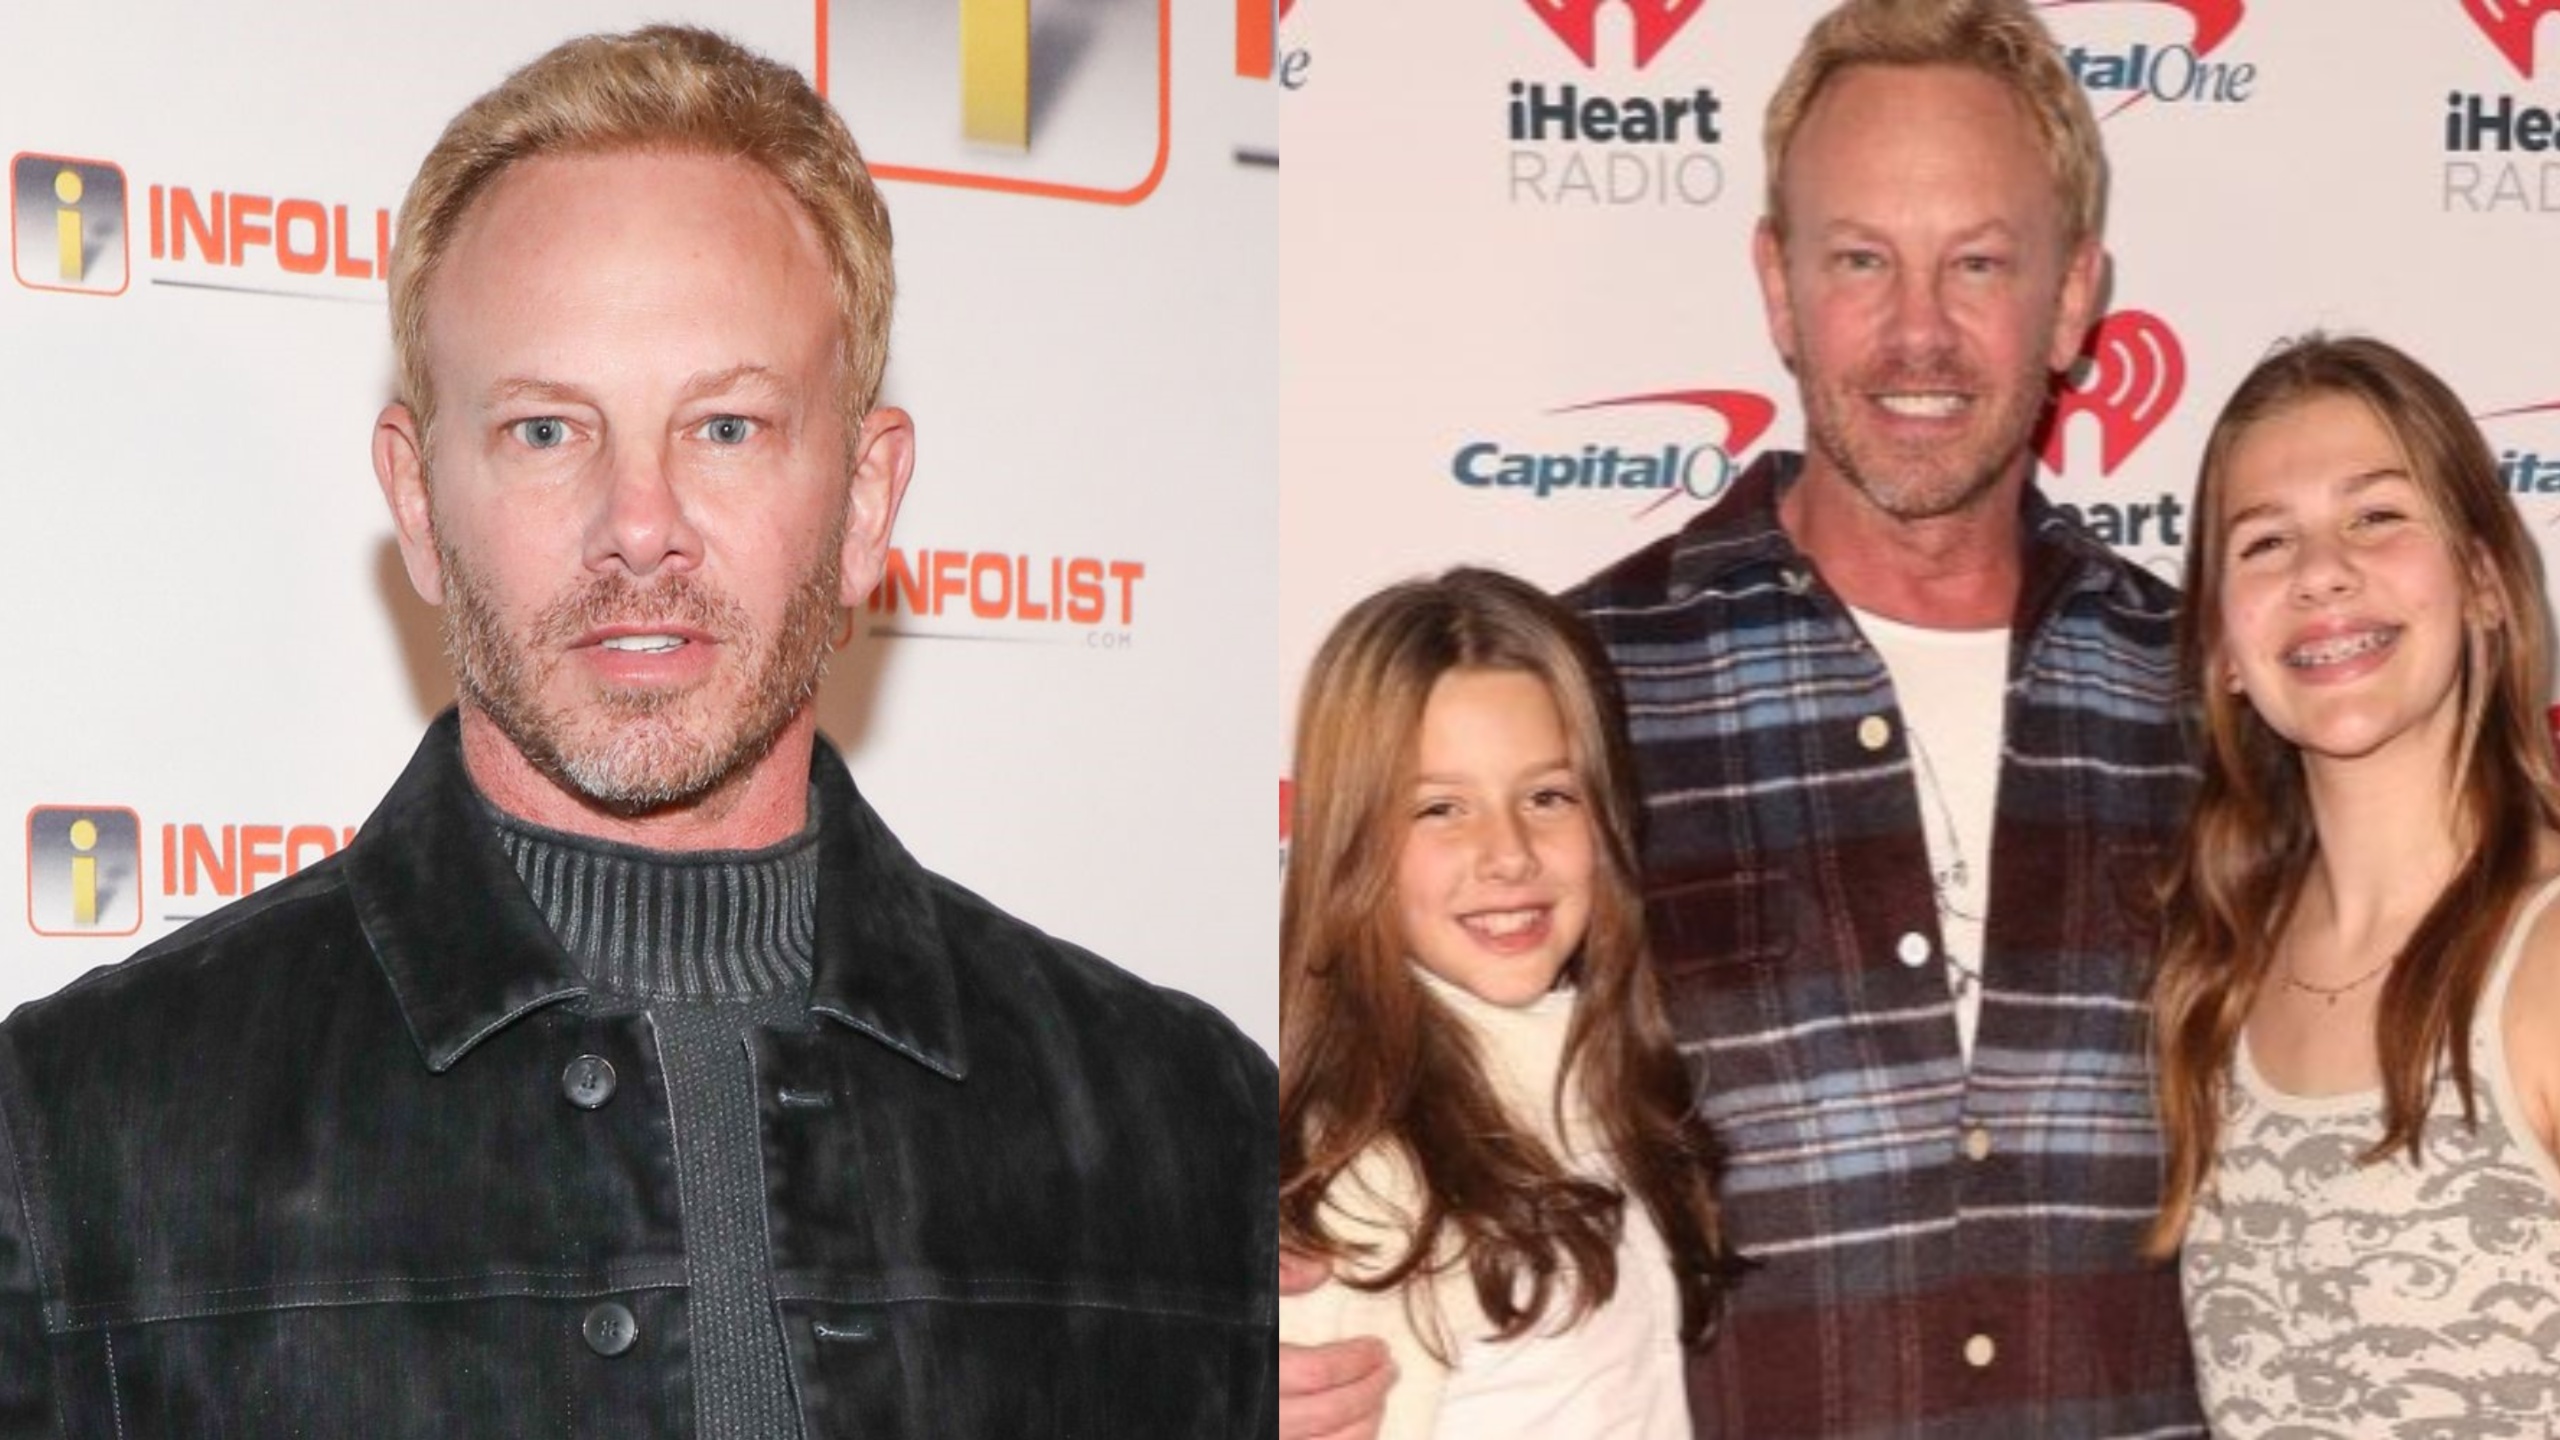 Ian Ziering was involved in a brawl with several bikers on Hollywood Boulevard